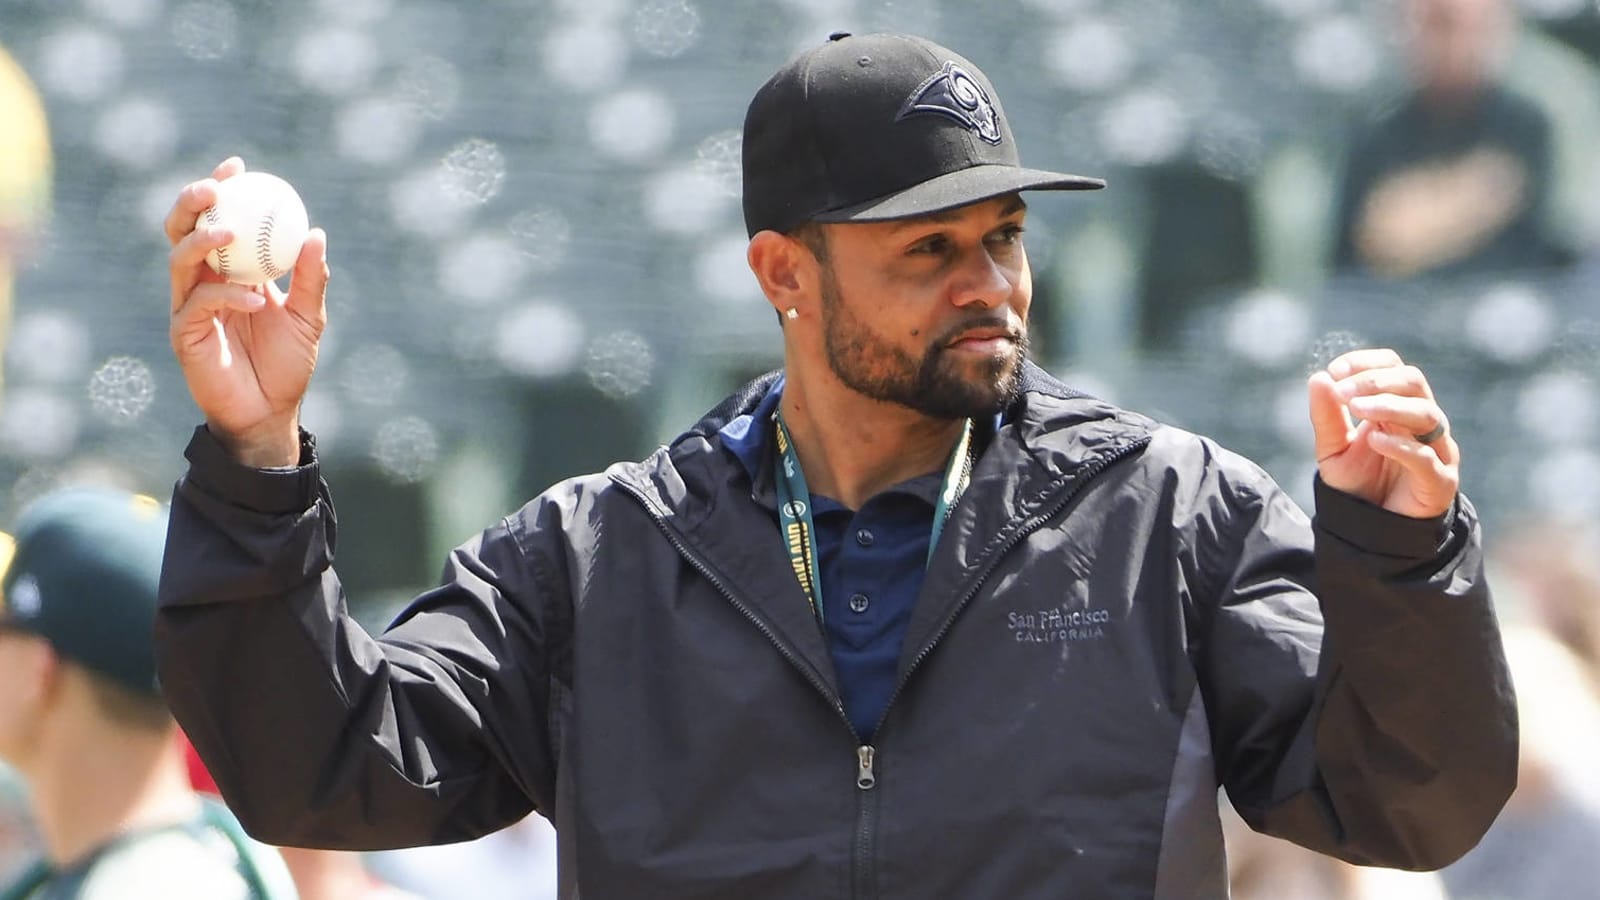 Coco Crisp steps down as California high school coach after two years